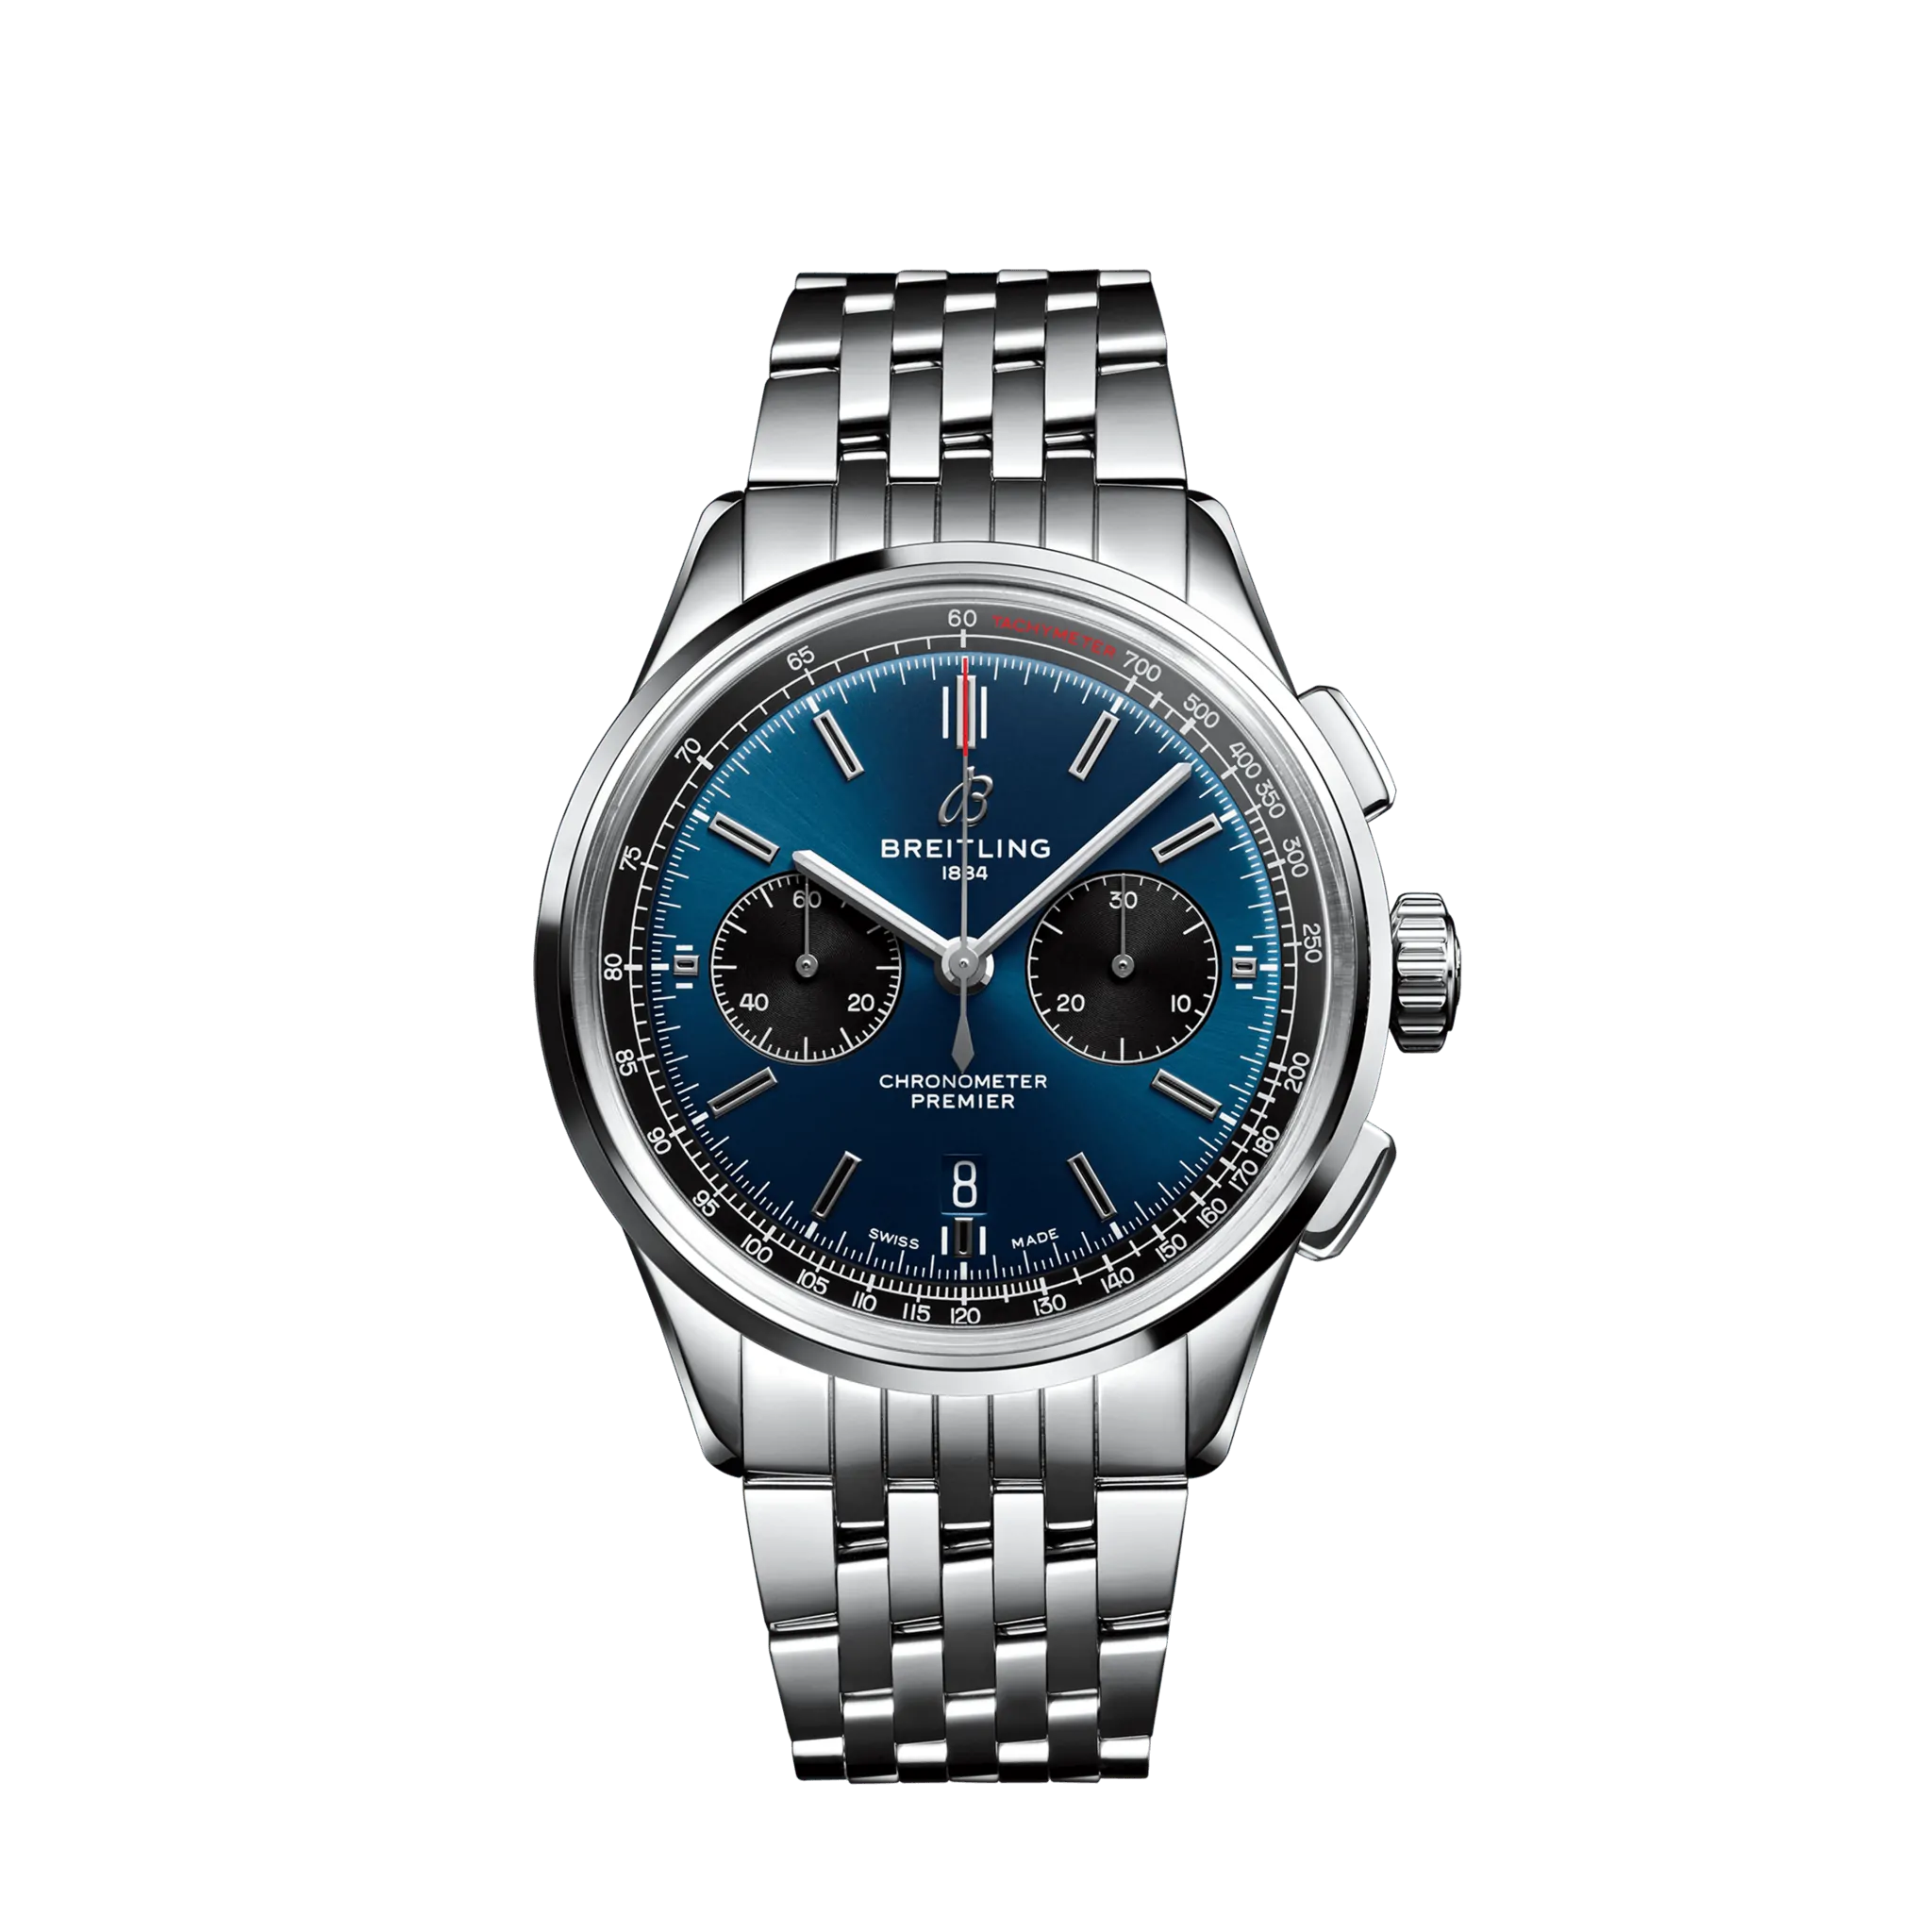 Breitling Premier B01 Chronograph 42 Stainless Steel Men's Watch